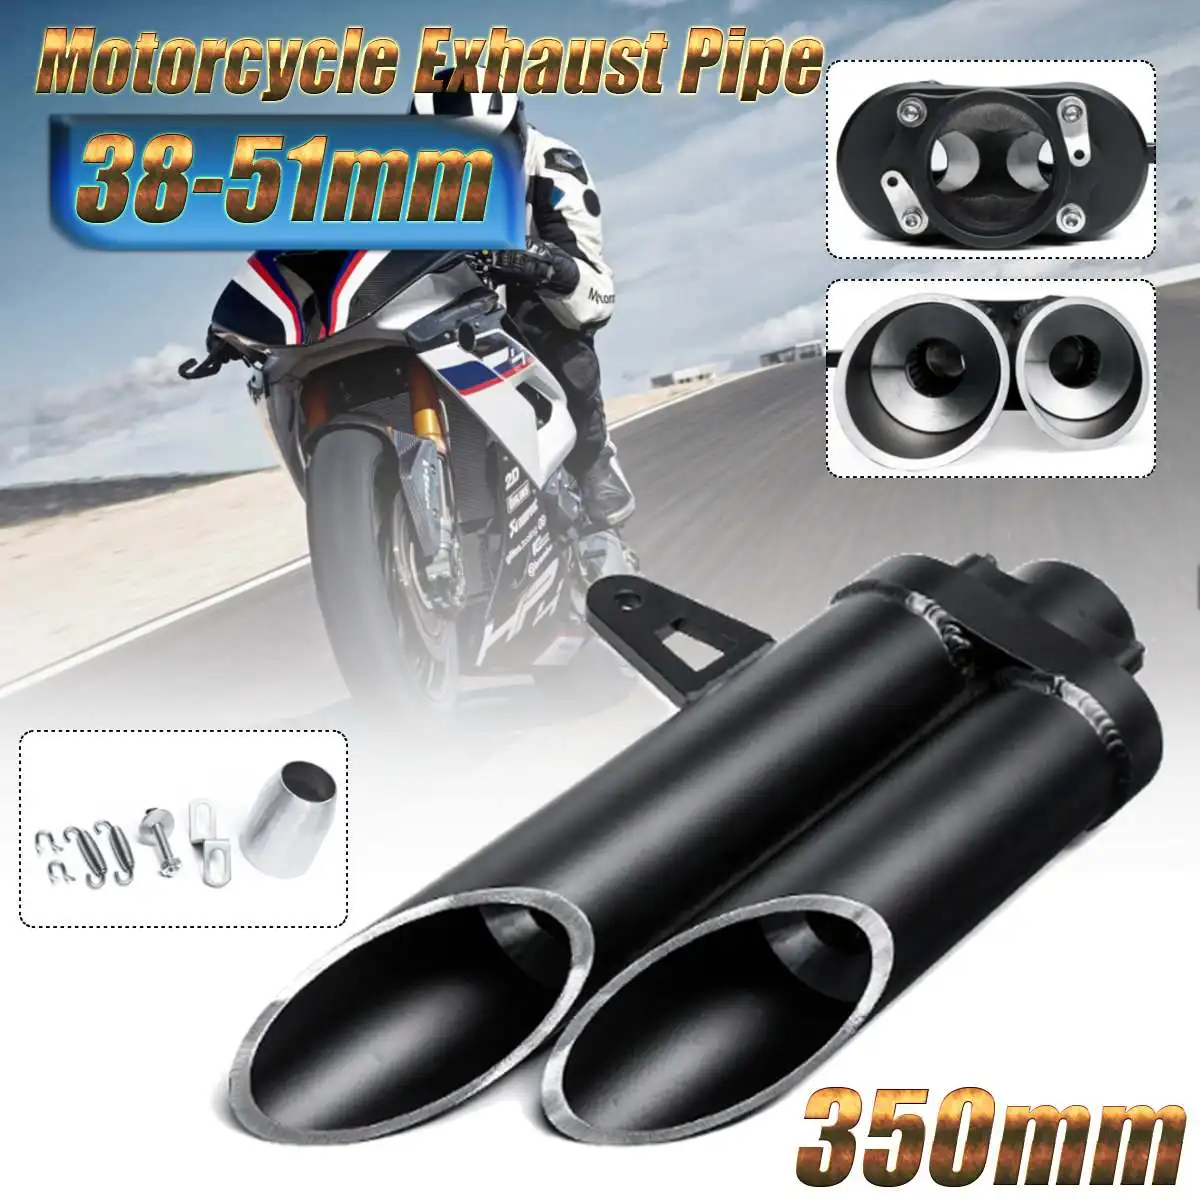 

Universal Exhaust 38-51 mm Double-outlet Aluminium Alloy Motorcycle Exhaust Pipe Tip 350mm 422mm 507mm For Yamaha For Kawasaki